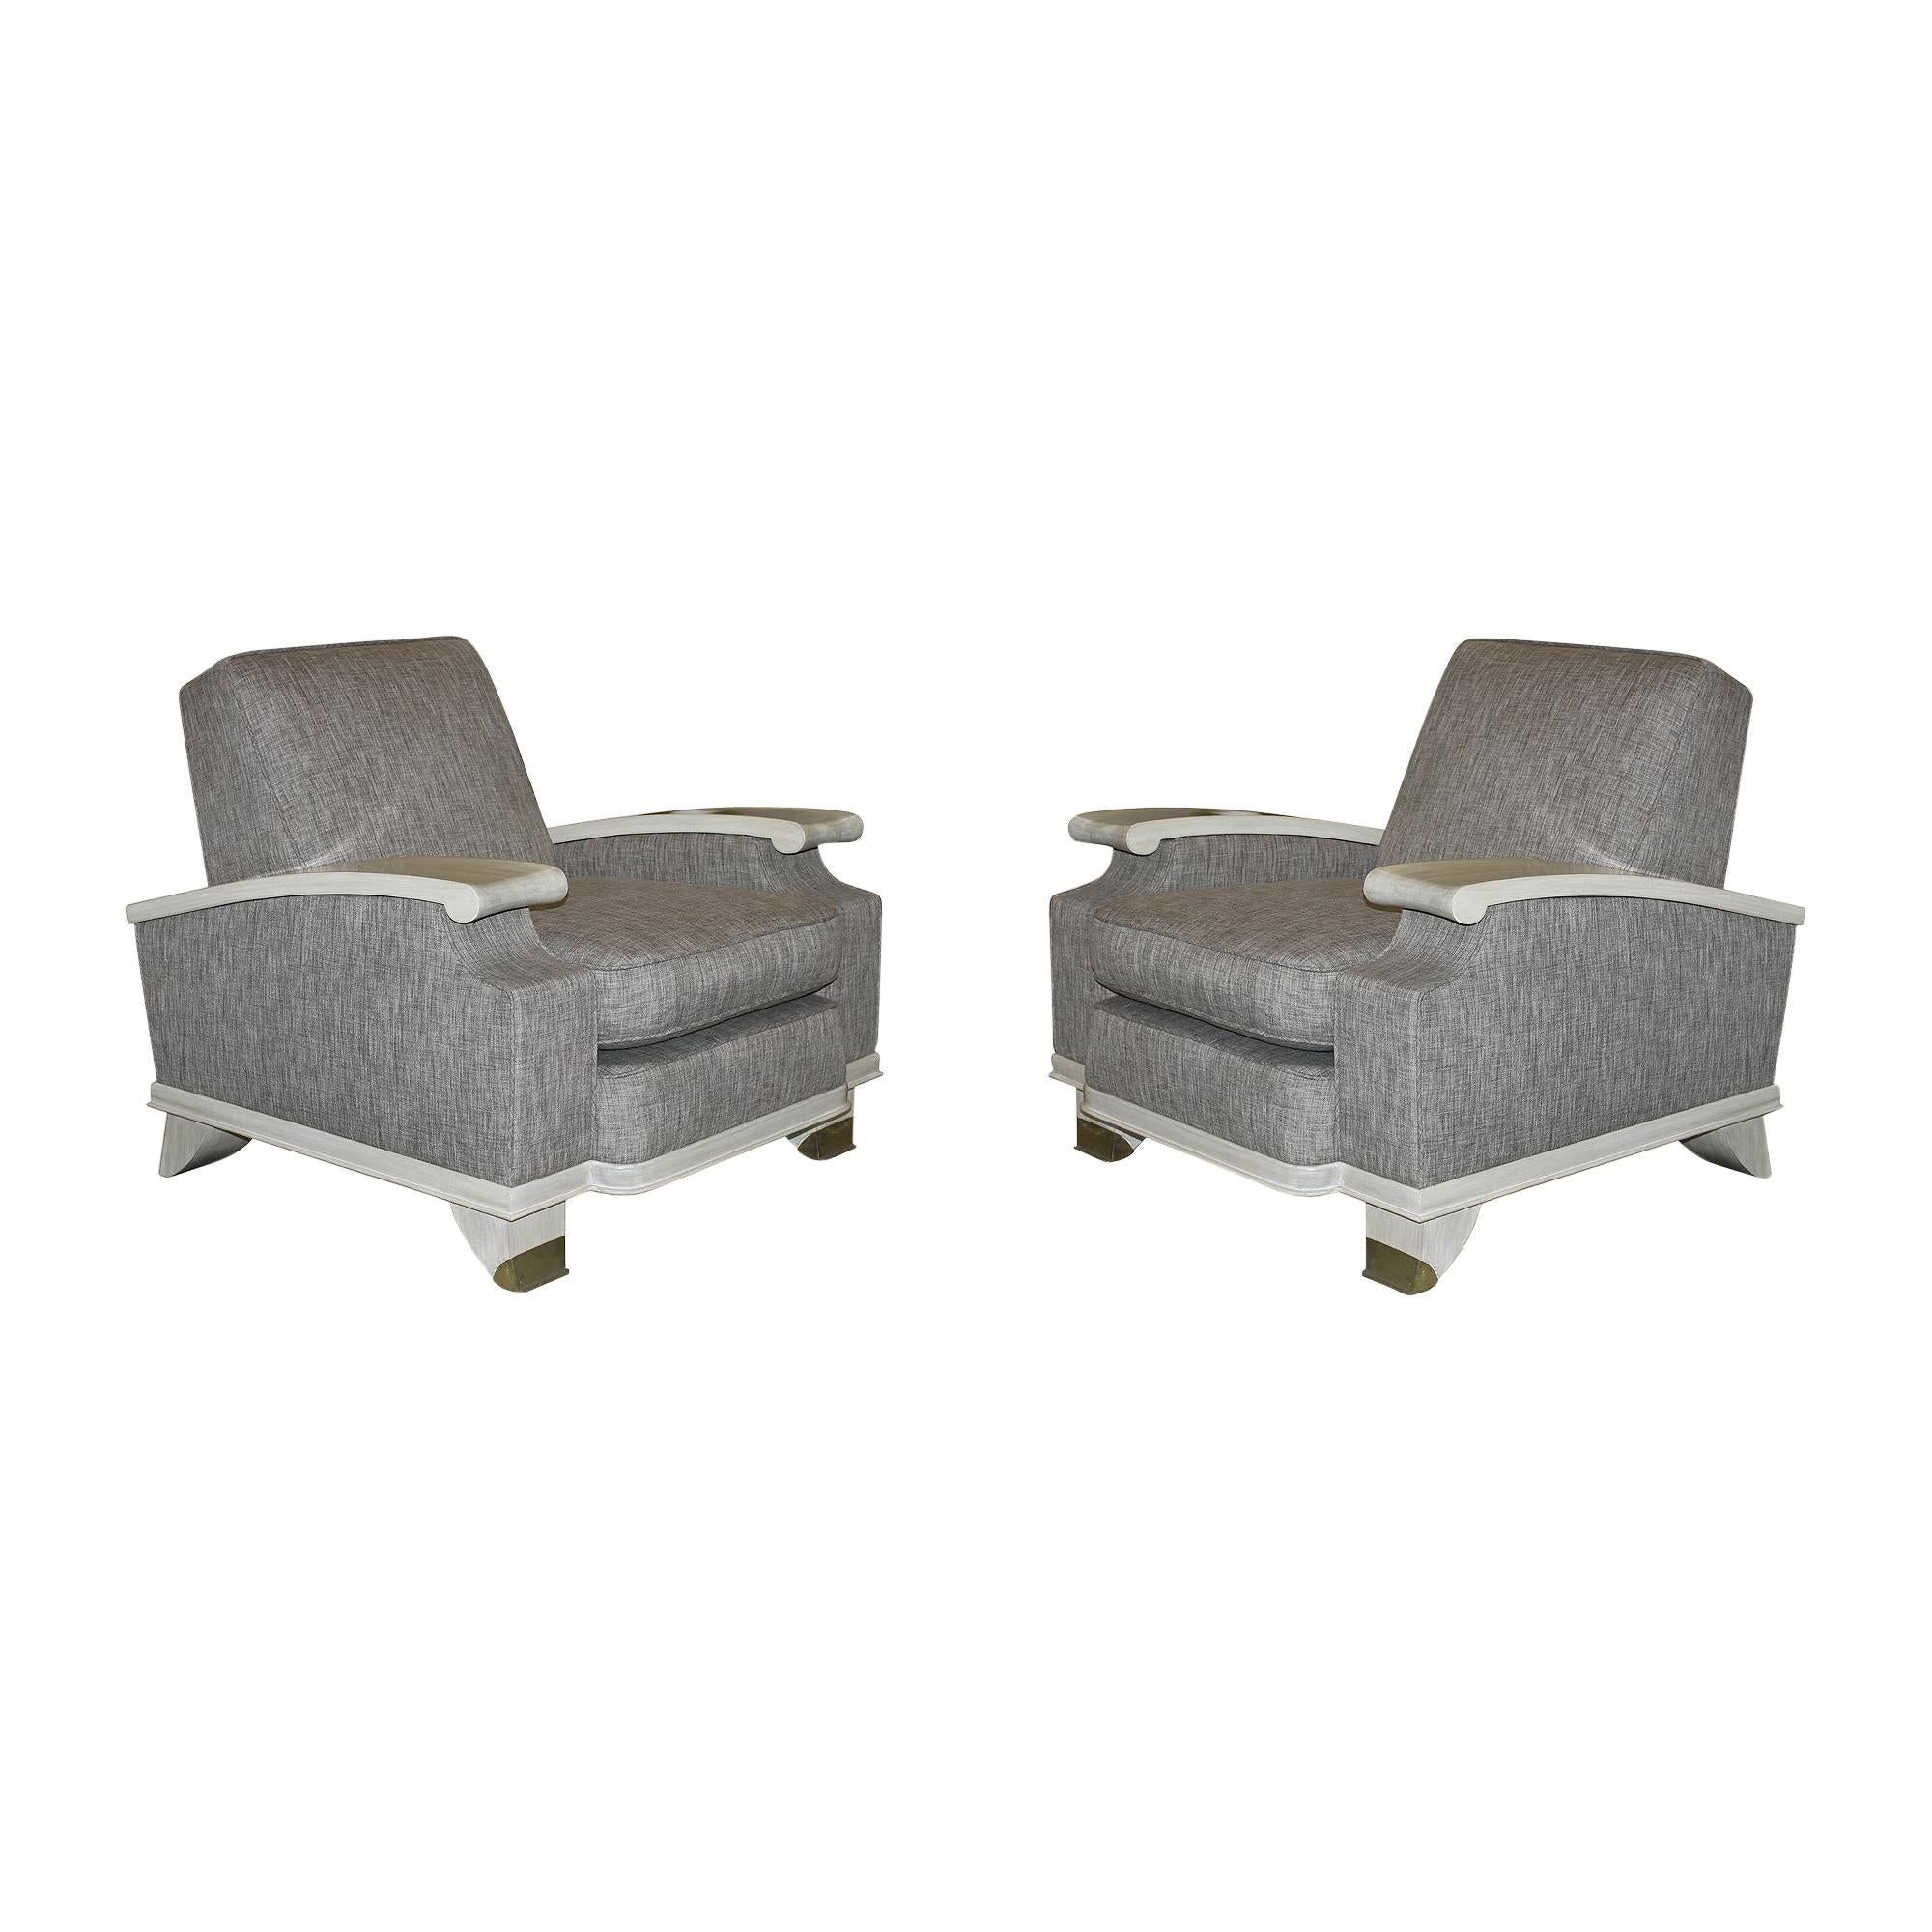 Jacques Adnet Model of Pair of Large Comfortable Armchairs For Sale